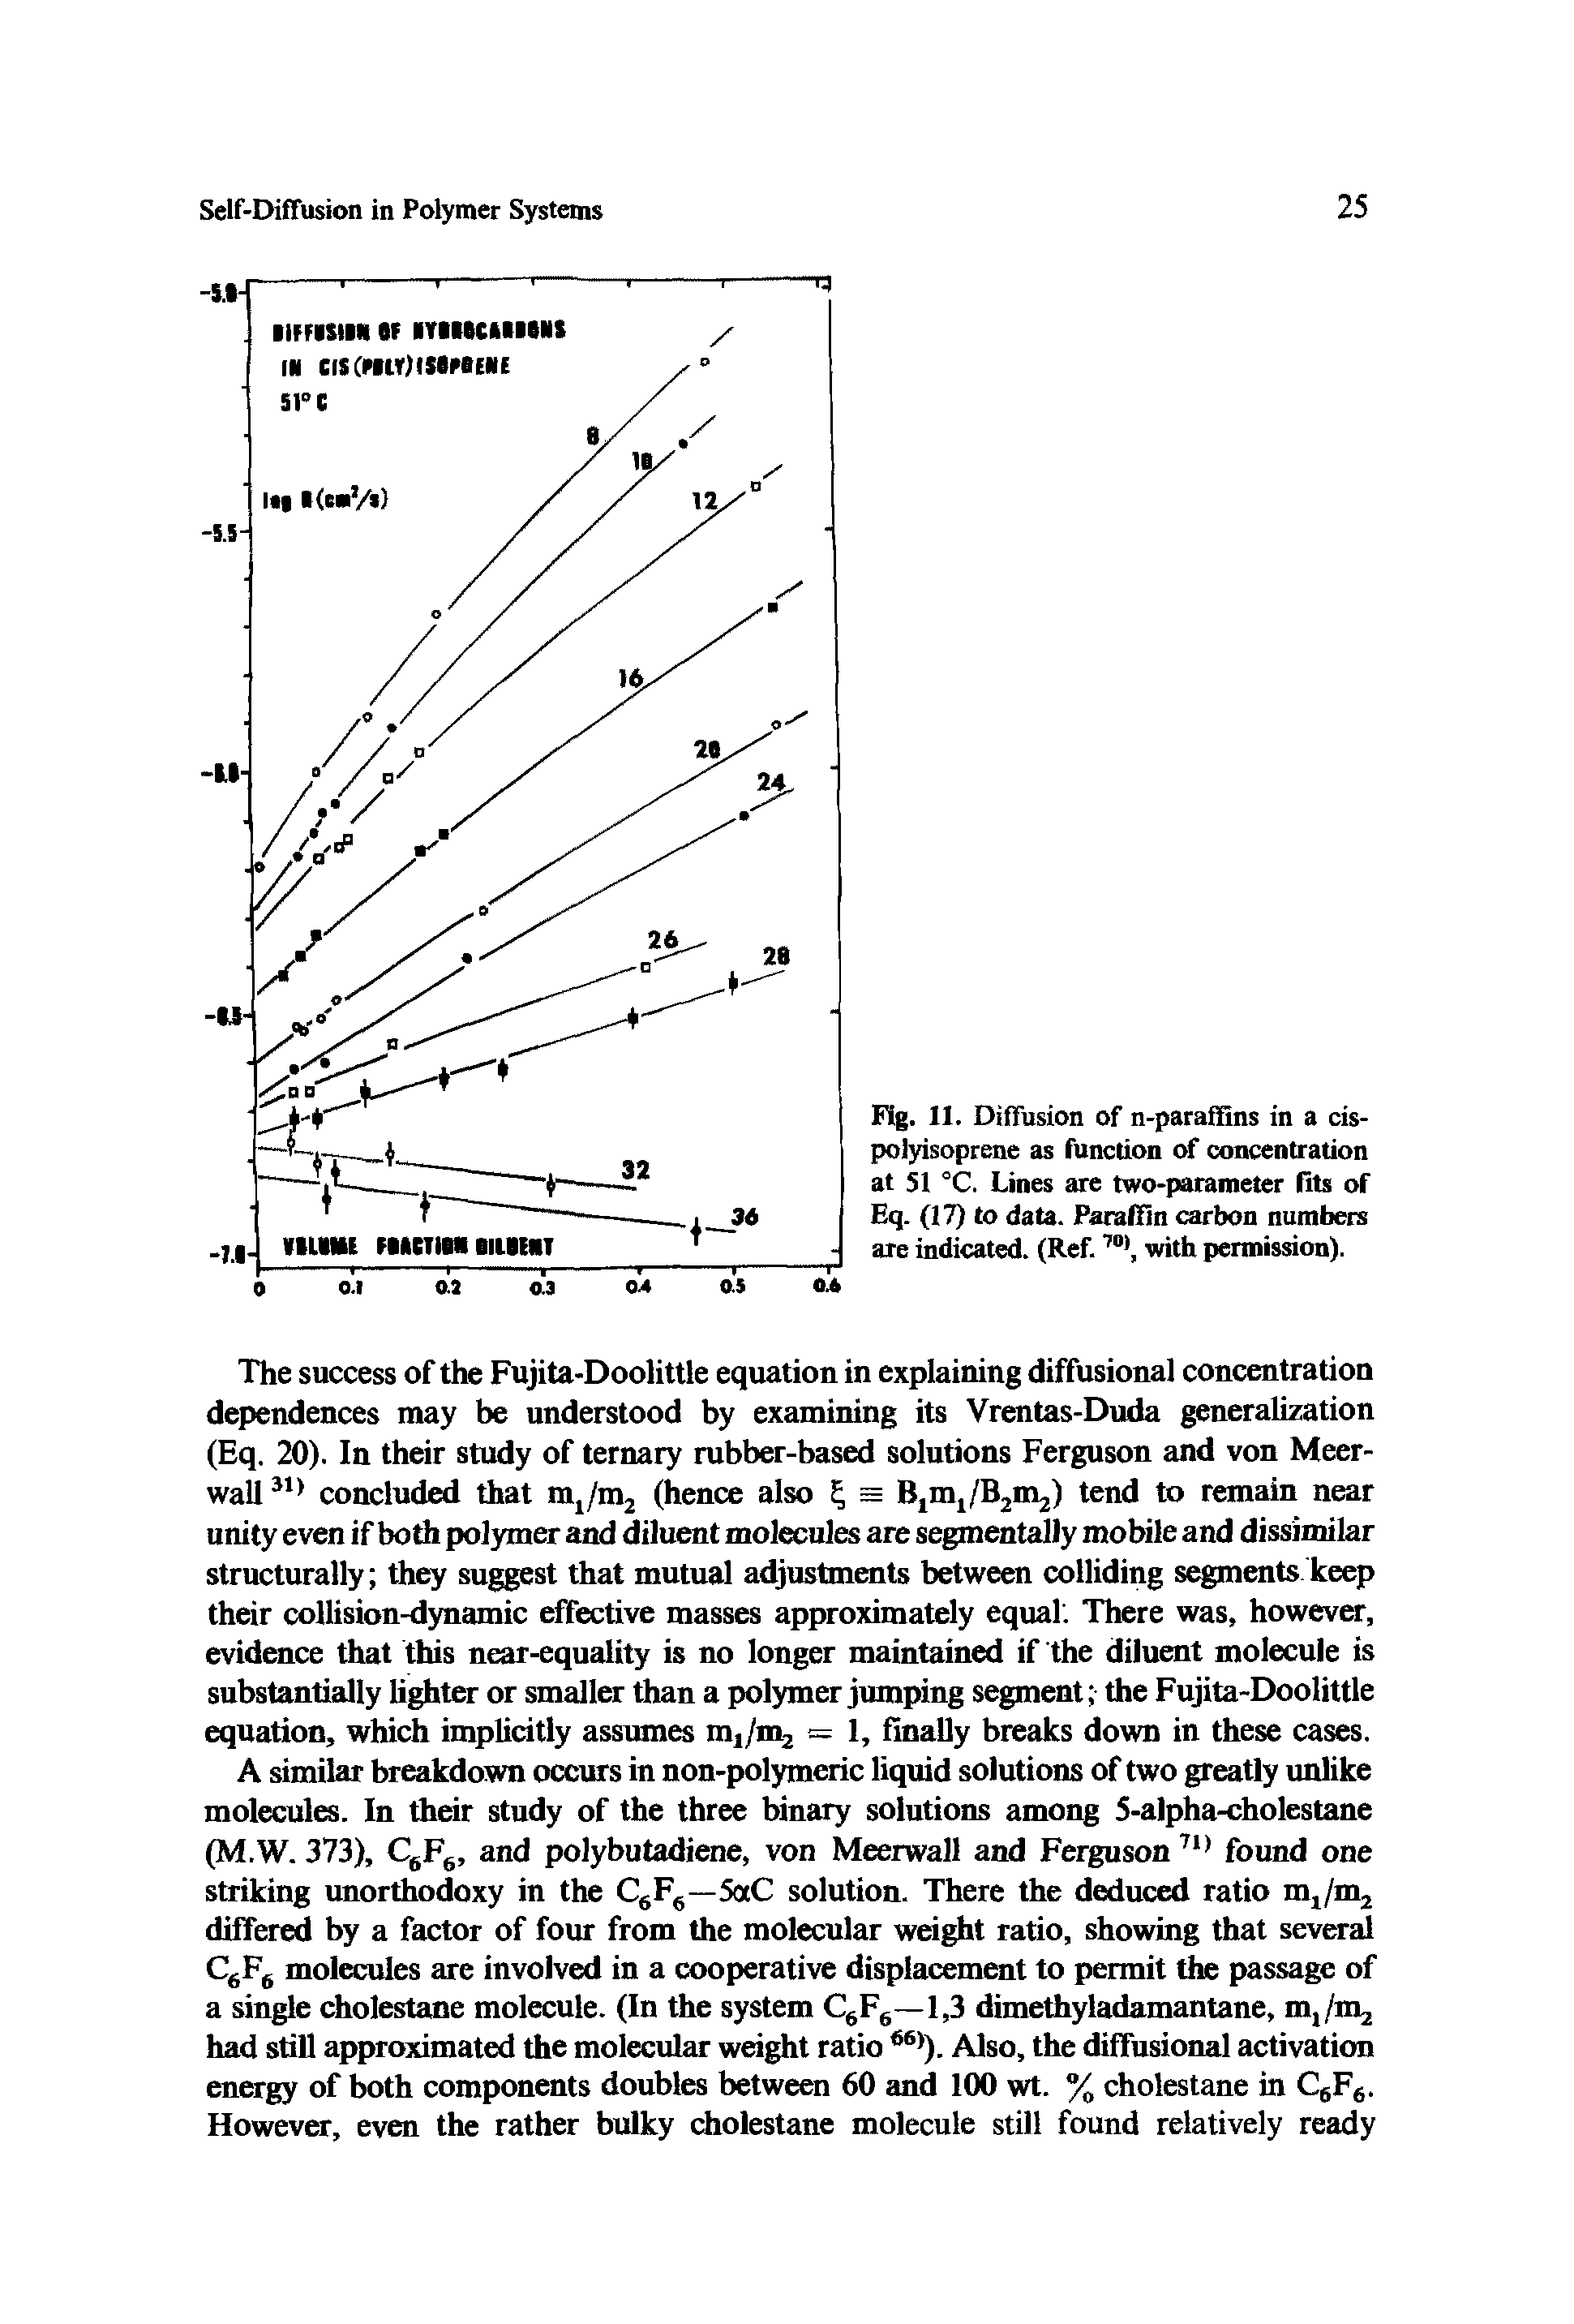 Fig. 11. Diffusion of n-paraffins in a cis-polyisoprene as function of concentration at 51 °C. Lines are two-parameter fits of Eq. (17) to data. Paraffin carbon numbers are indicated. (Ref.70), with permission).